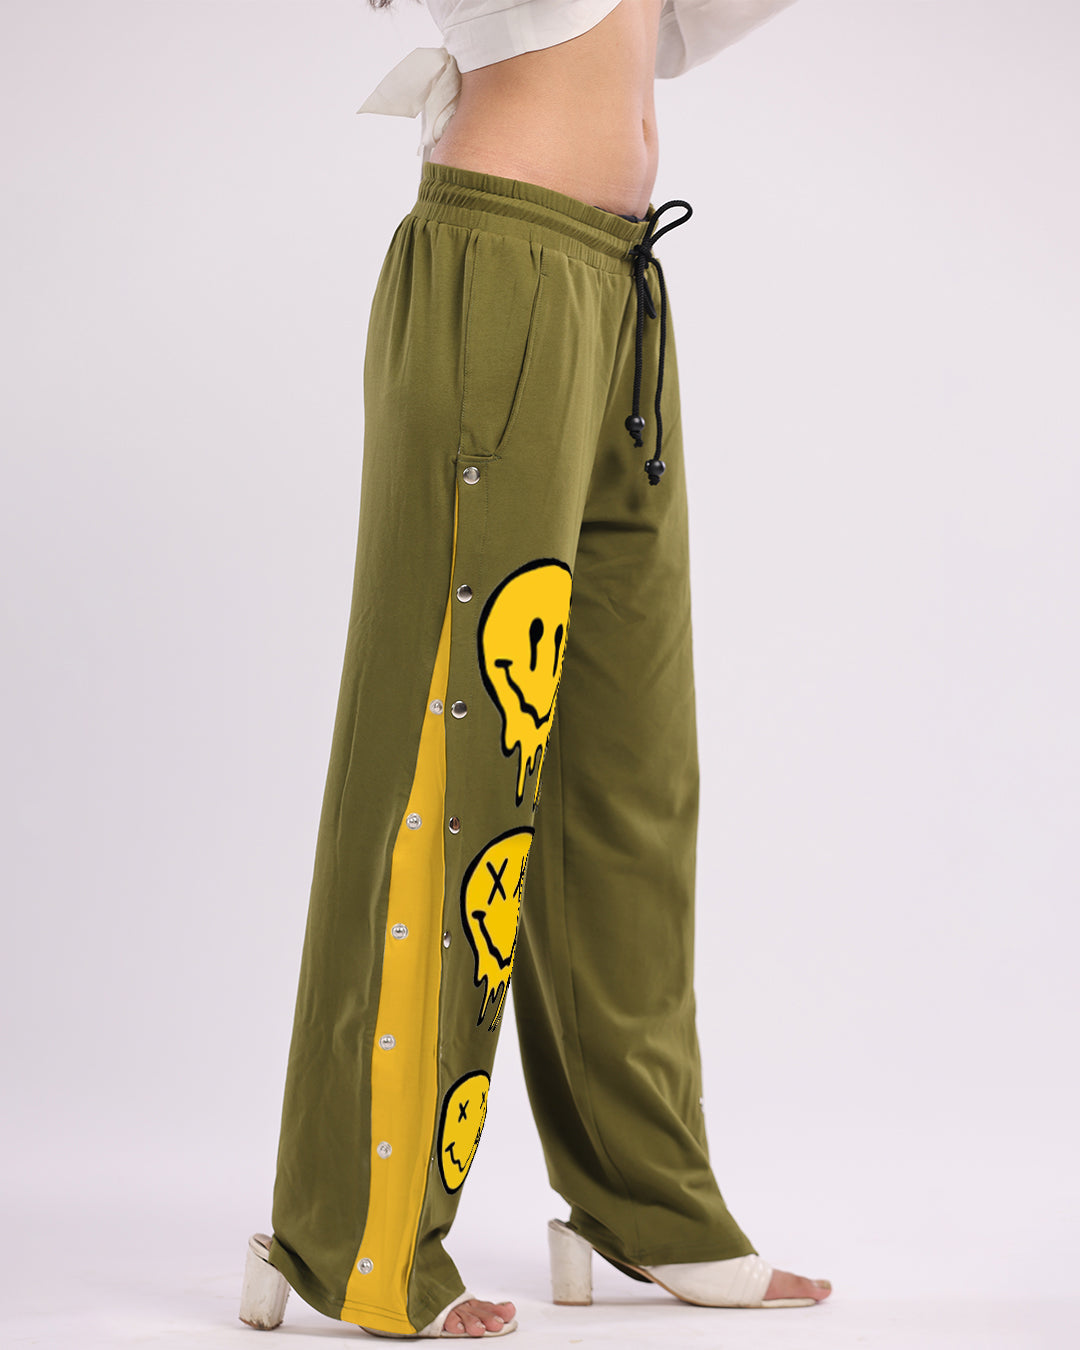 Smiley Women's Olive Snap Button Cotton Trousers